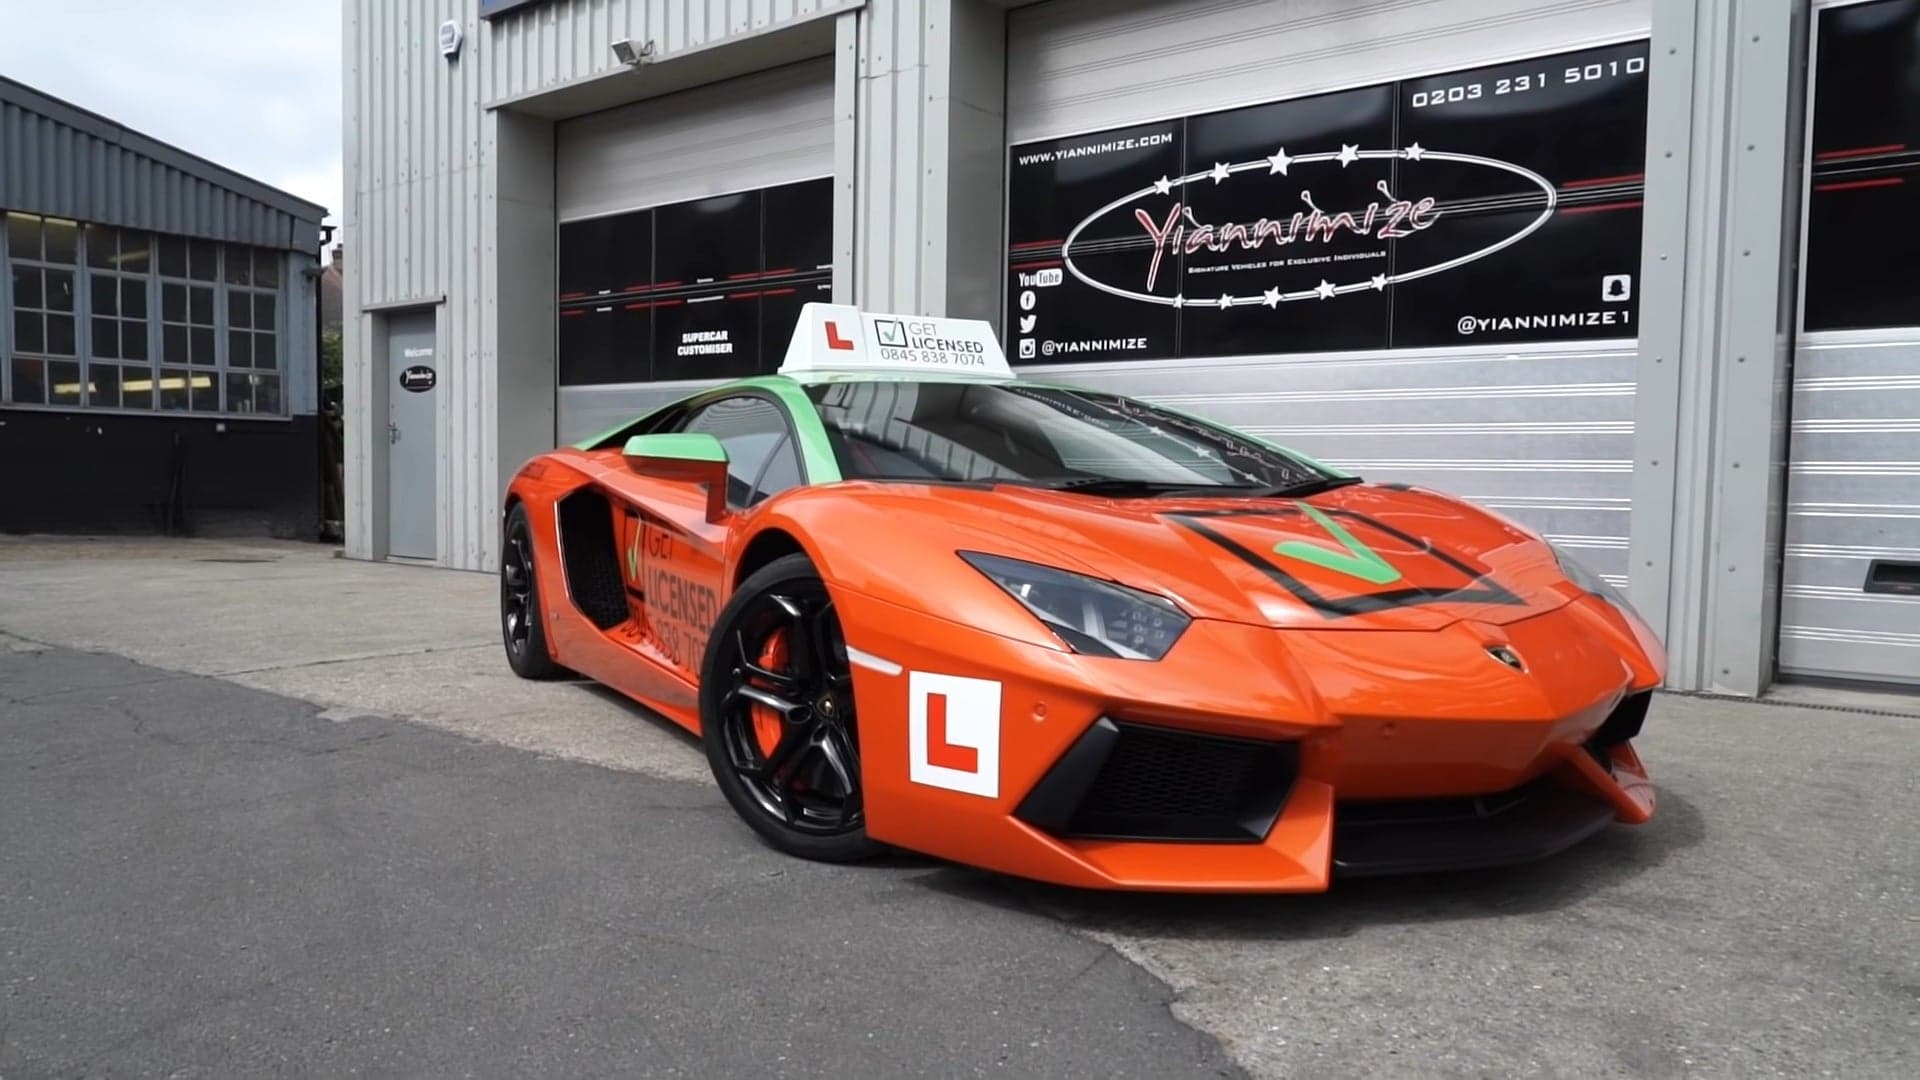 This Driver’s Ed School Lets Unlicensed Teens Learn to Drive in a Lamborghini Aventador